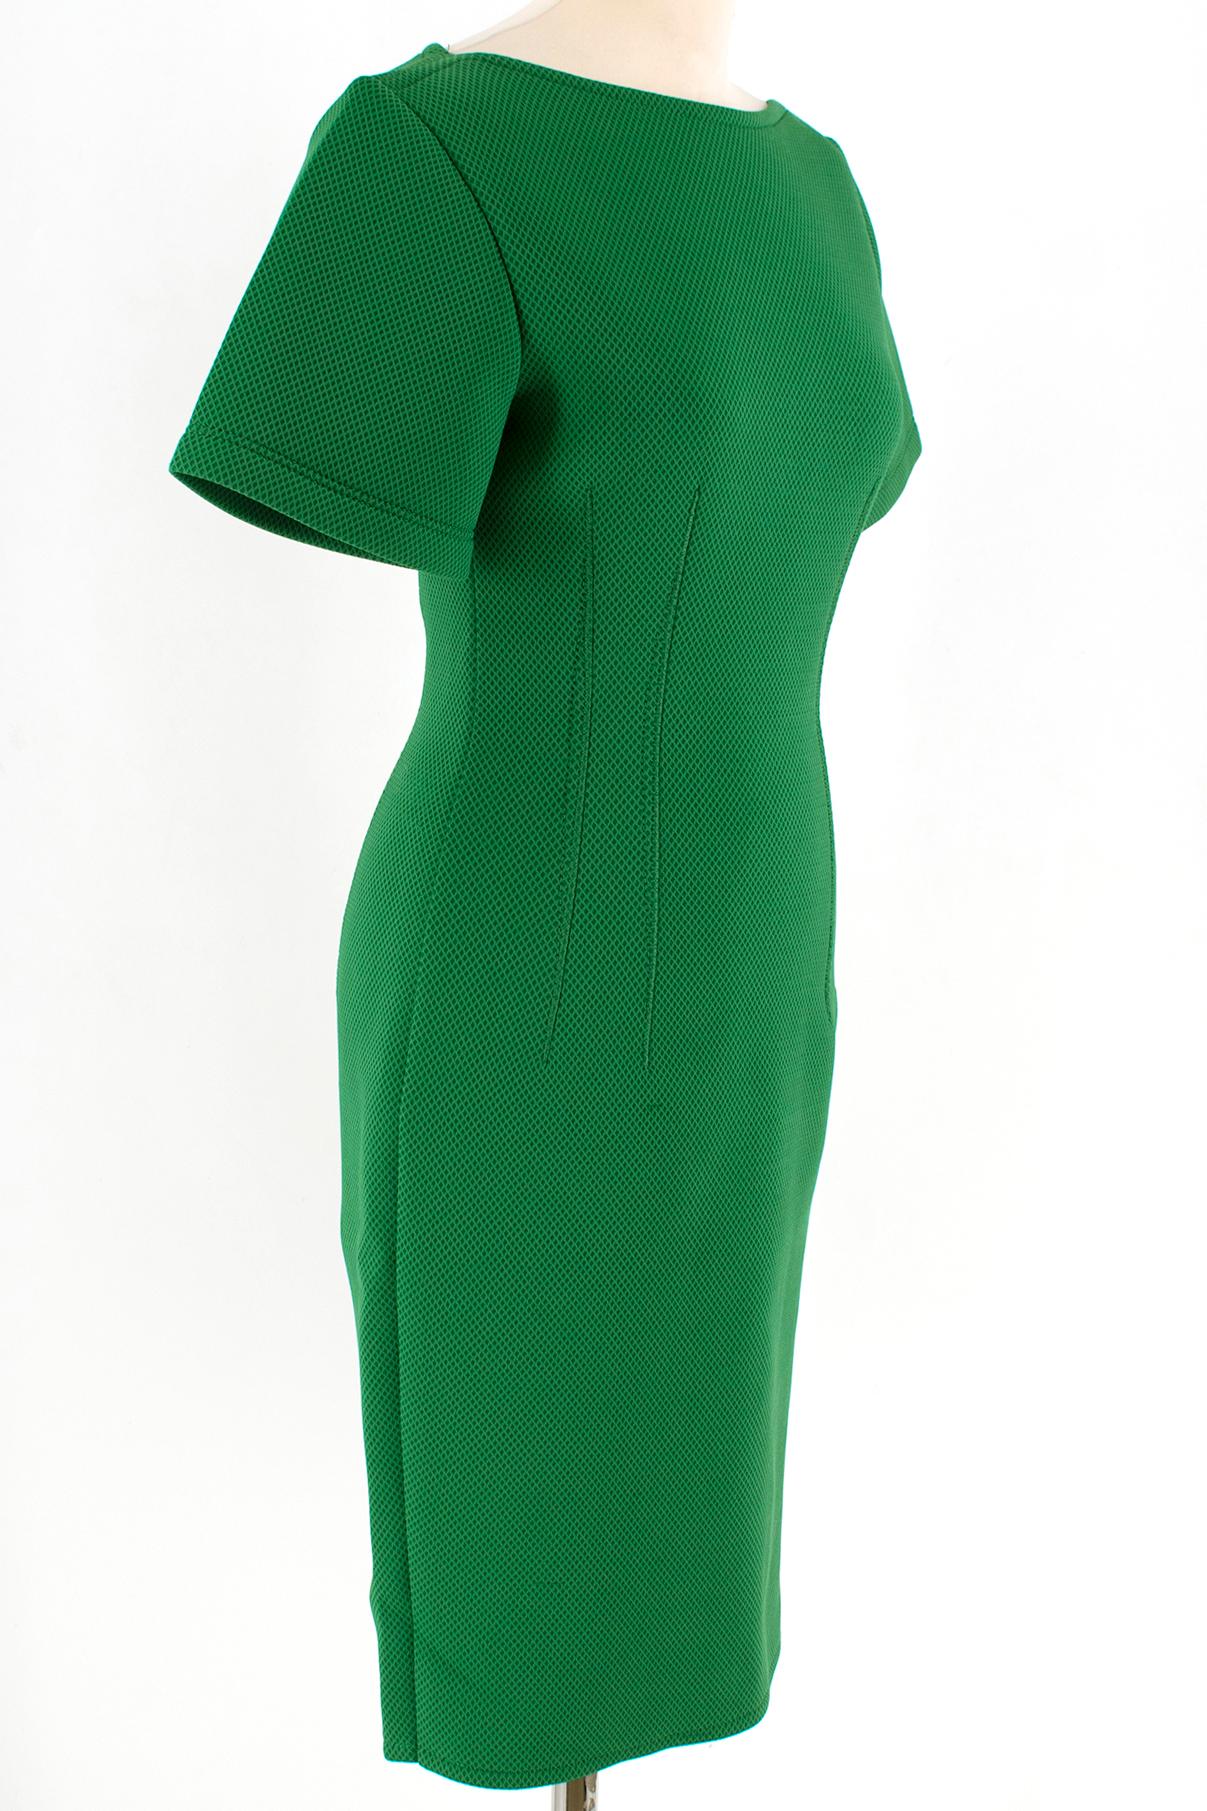 Lanvin Green Fitted Mesh Dress

Short sleeved mid-length green dress with stitch detailing 
Stretch material
Dart Stitch Detailing on dress front and back 
Single back closure top to bottom of the dress
Back dress slit 

Please note, these items are